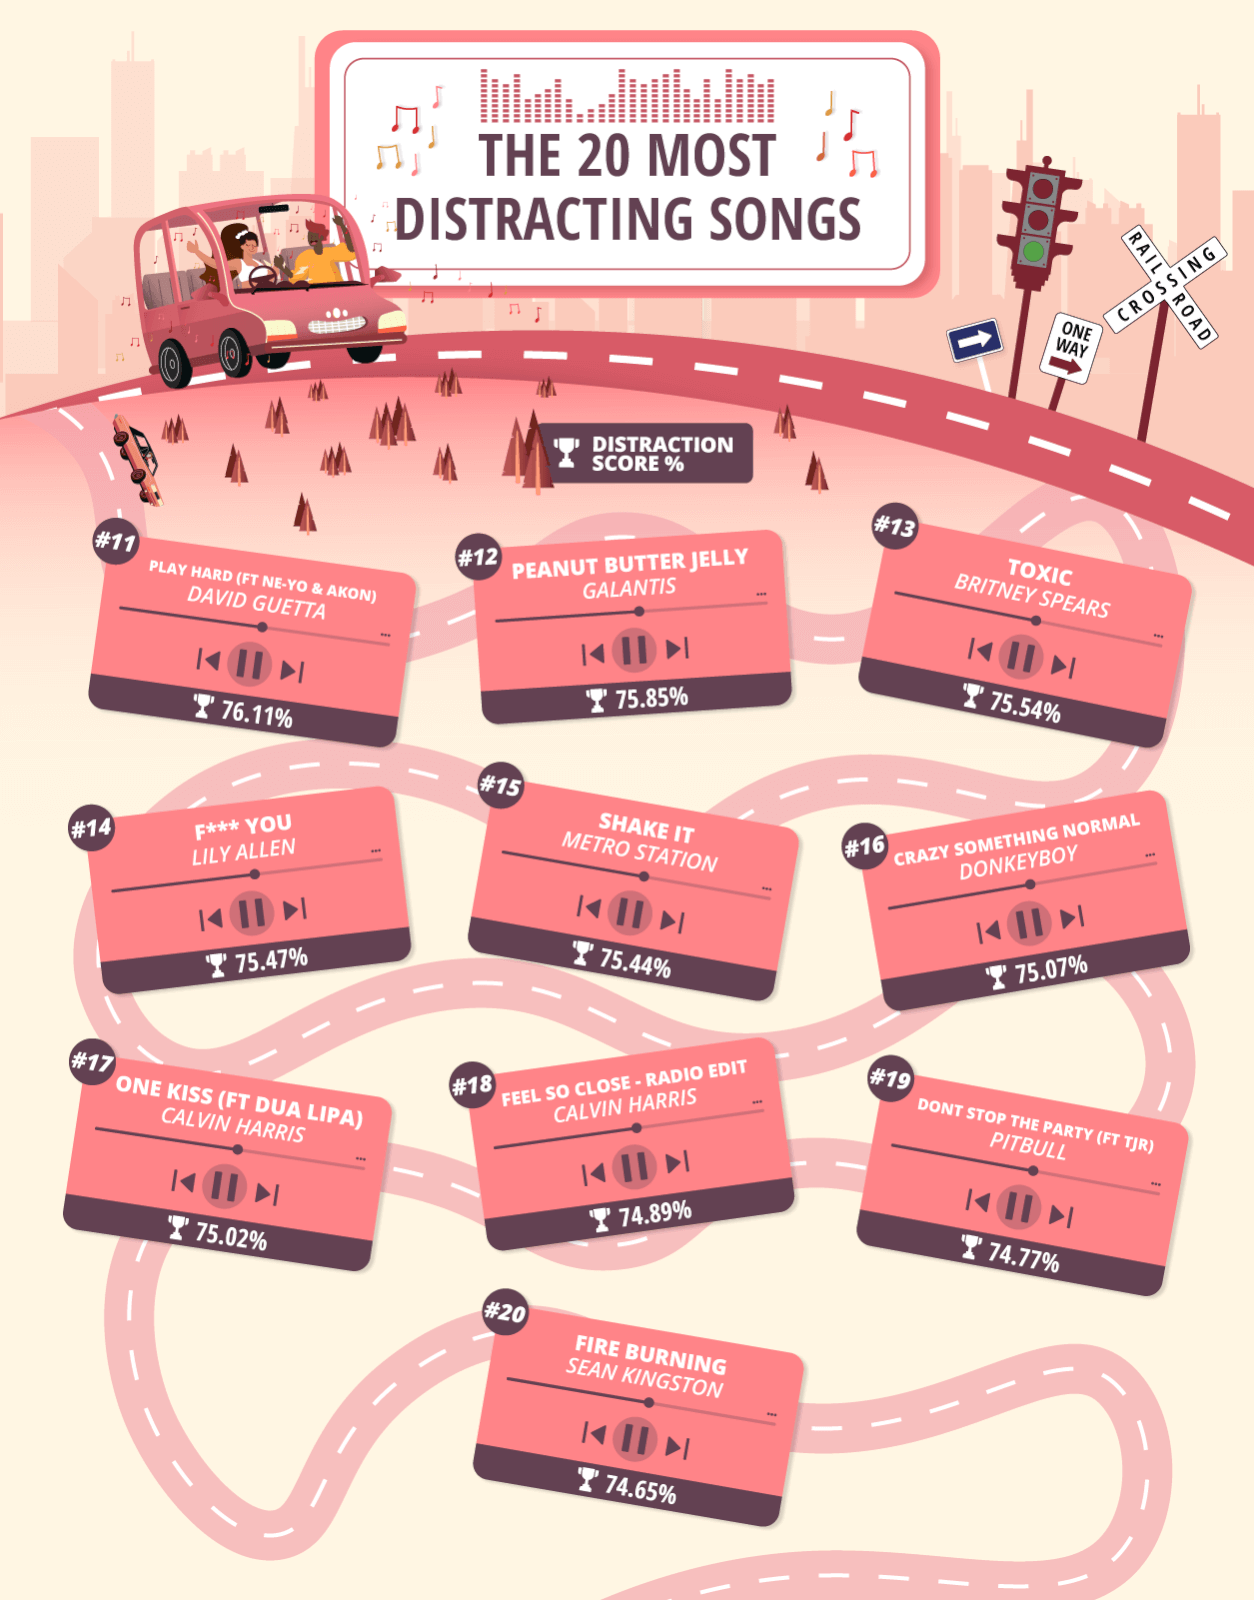 Image showing the twenty most distracting songs to listen to while driving.